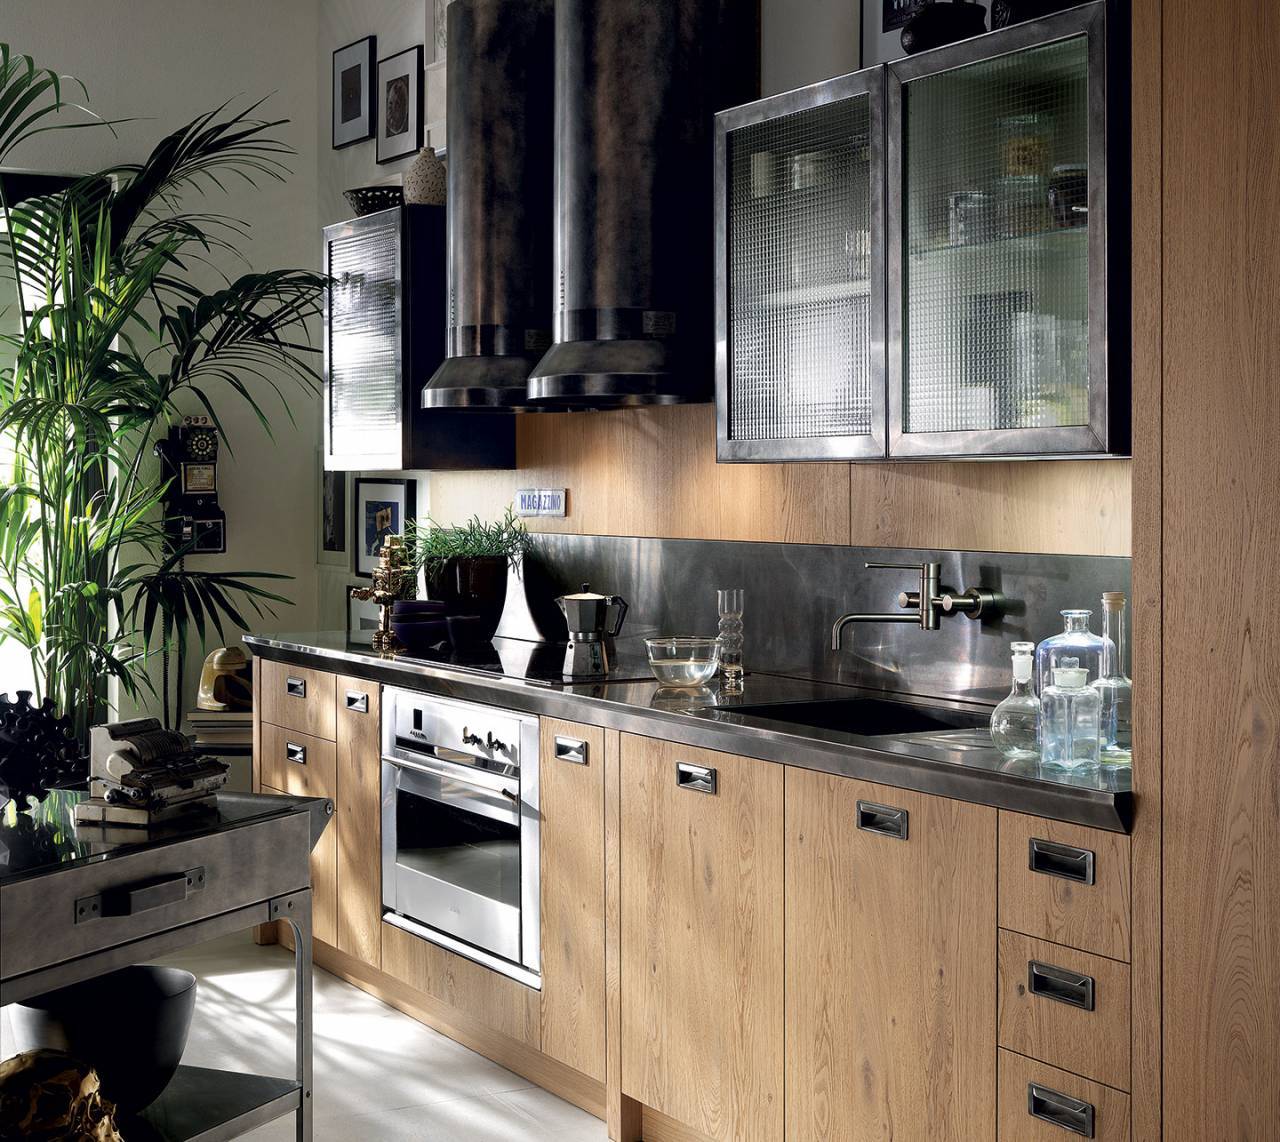 Diesel Living and Scavolini kitchen